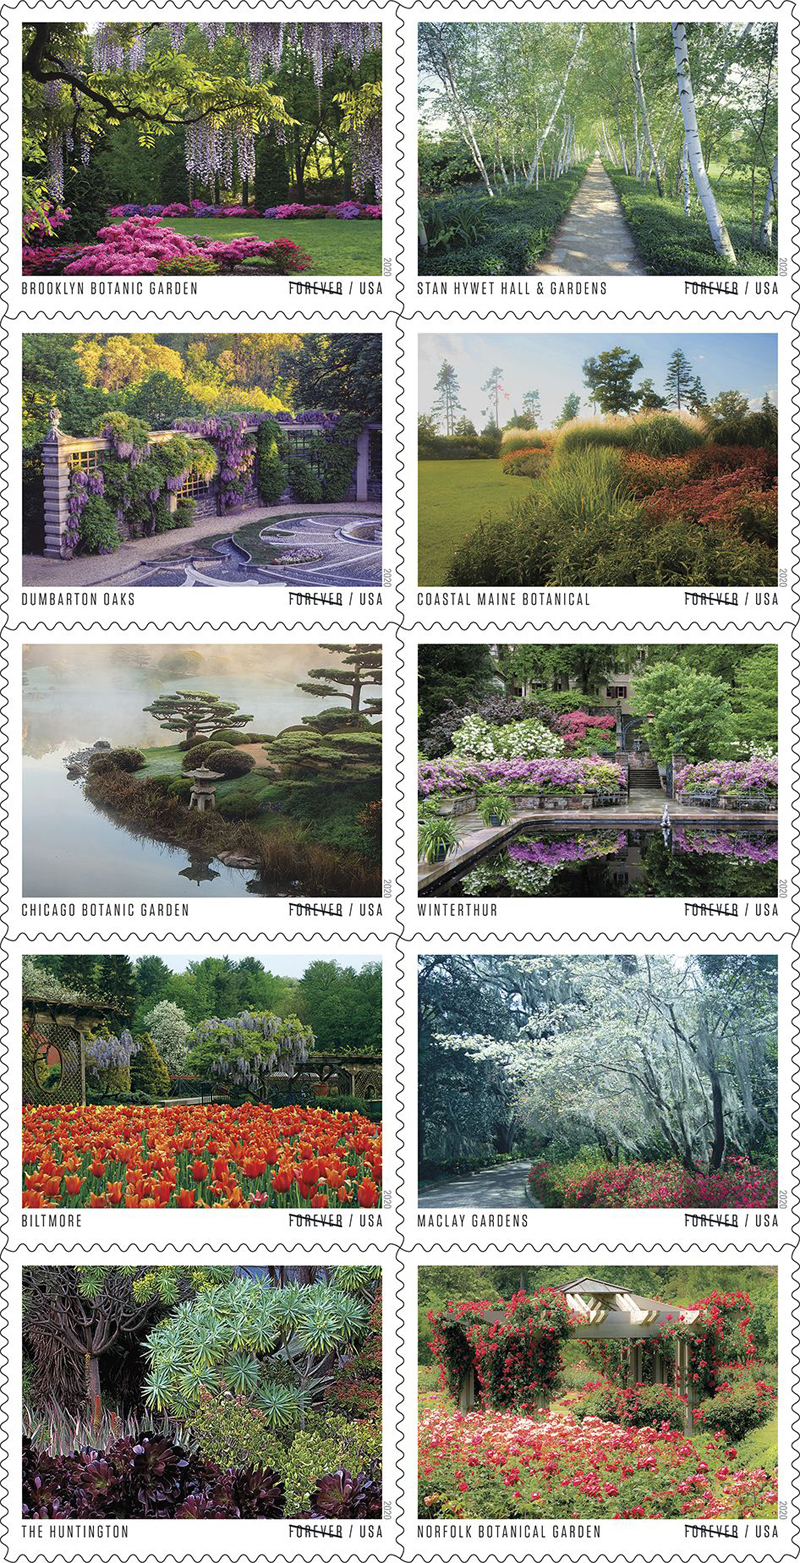 The Coastal Maine Botanical Gardens feature prominently in a new line of U.S. Postal Service stamps.